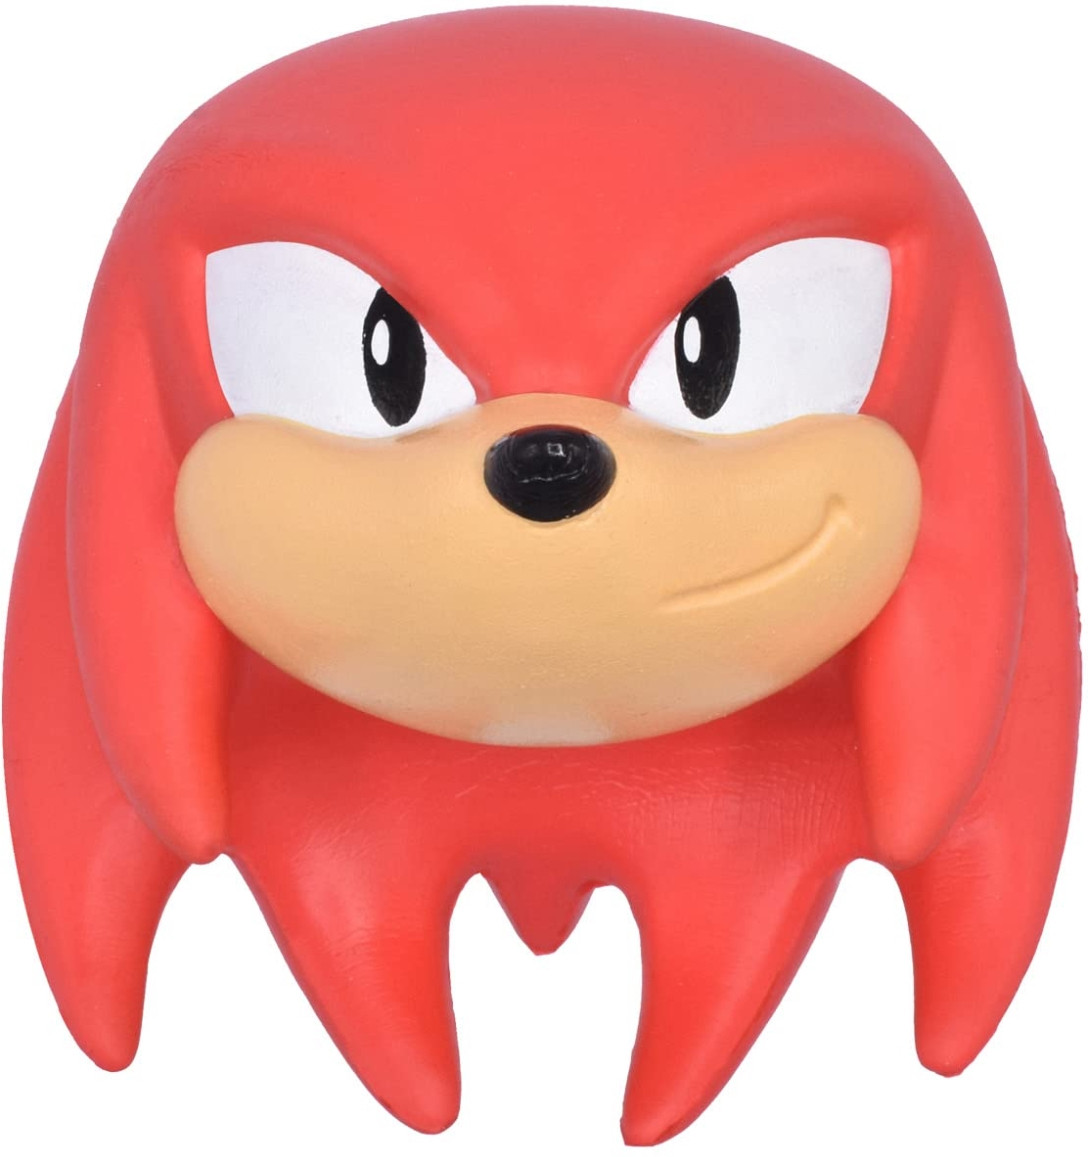 Sonic the Hedgehog Mega Squishme - Classic Knuckles